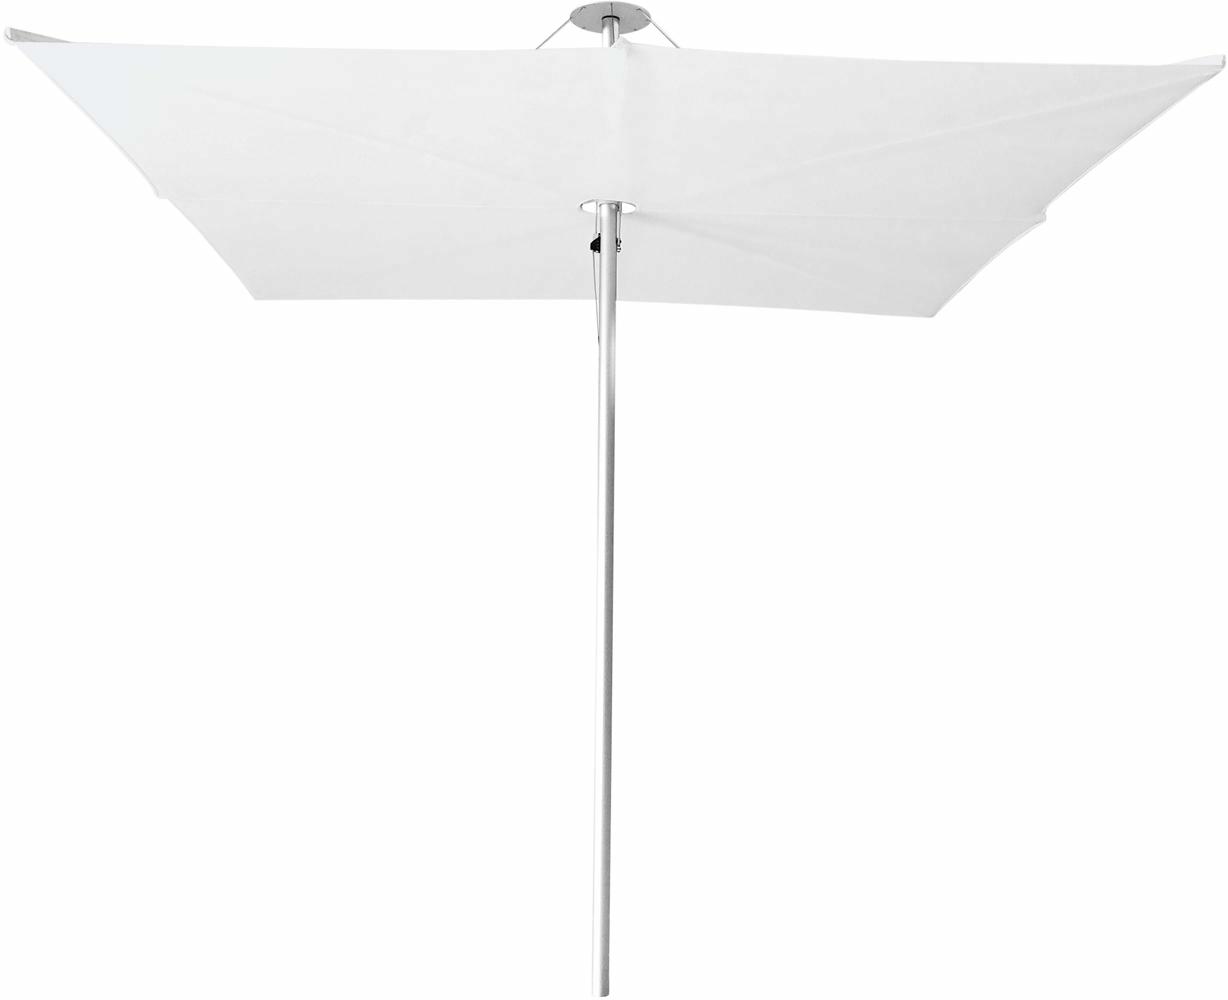 Infina center post umbrella, 3 m square, with frame in Aluminum and Solidum Natural canopy. 